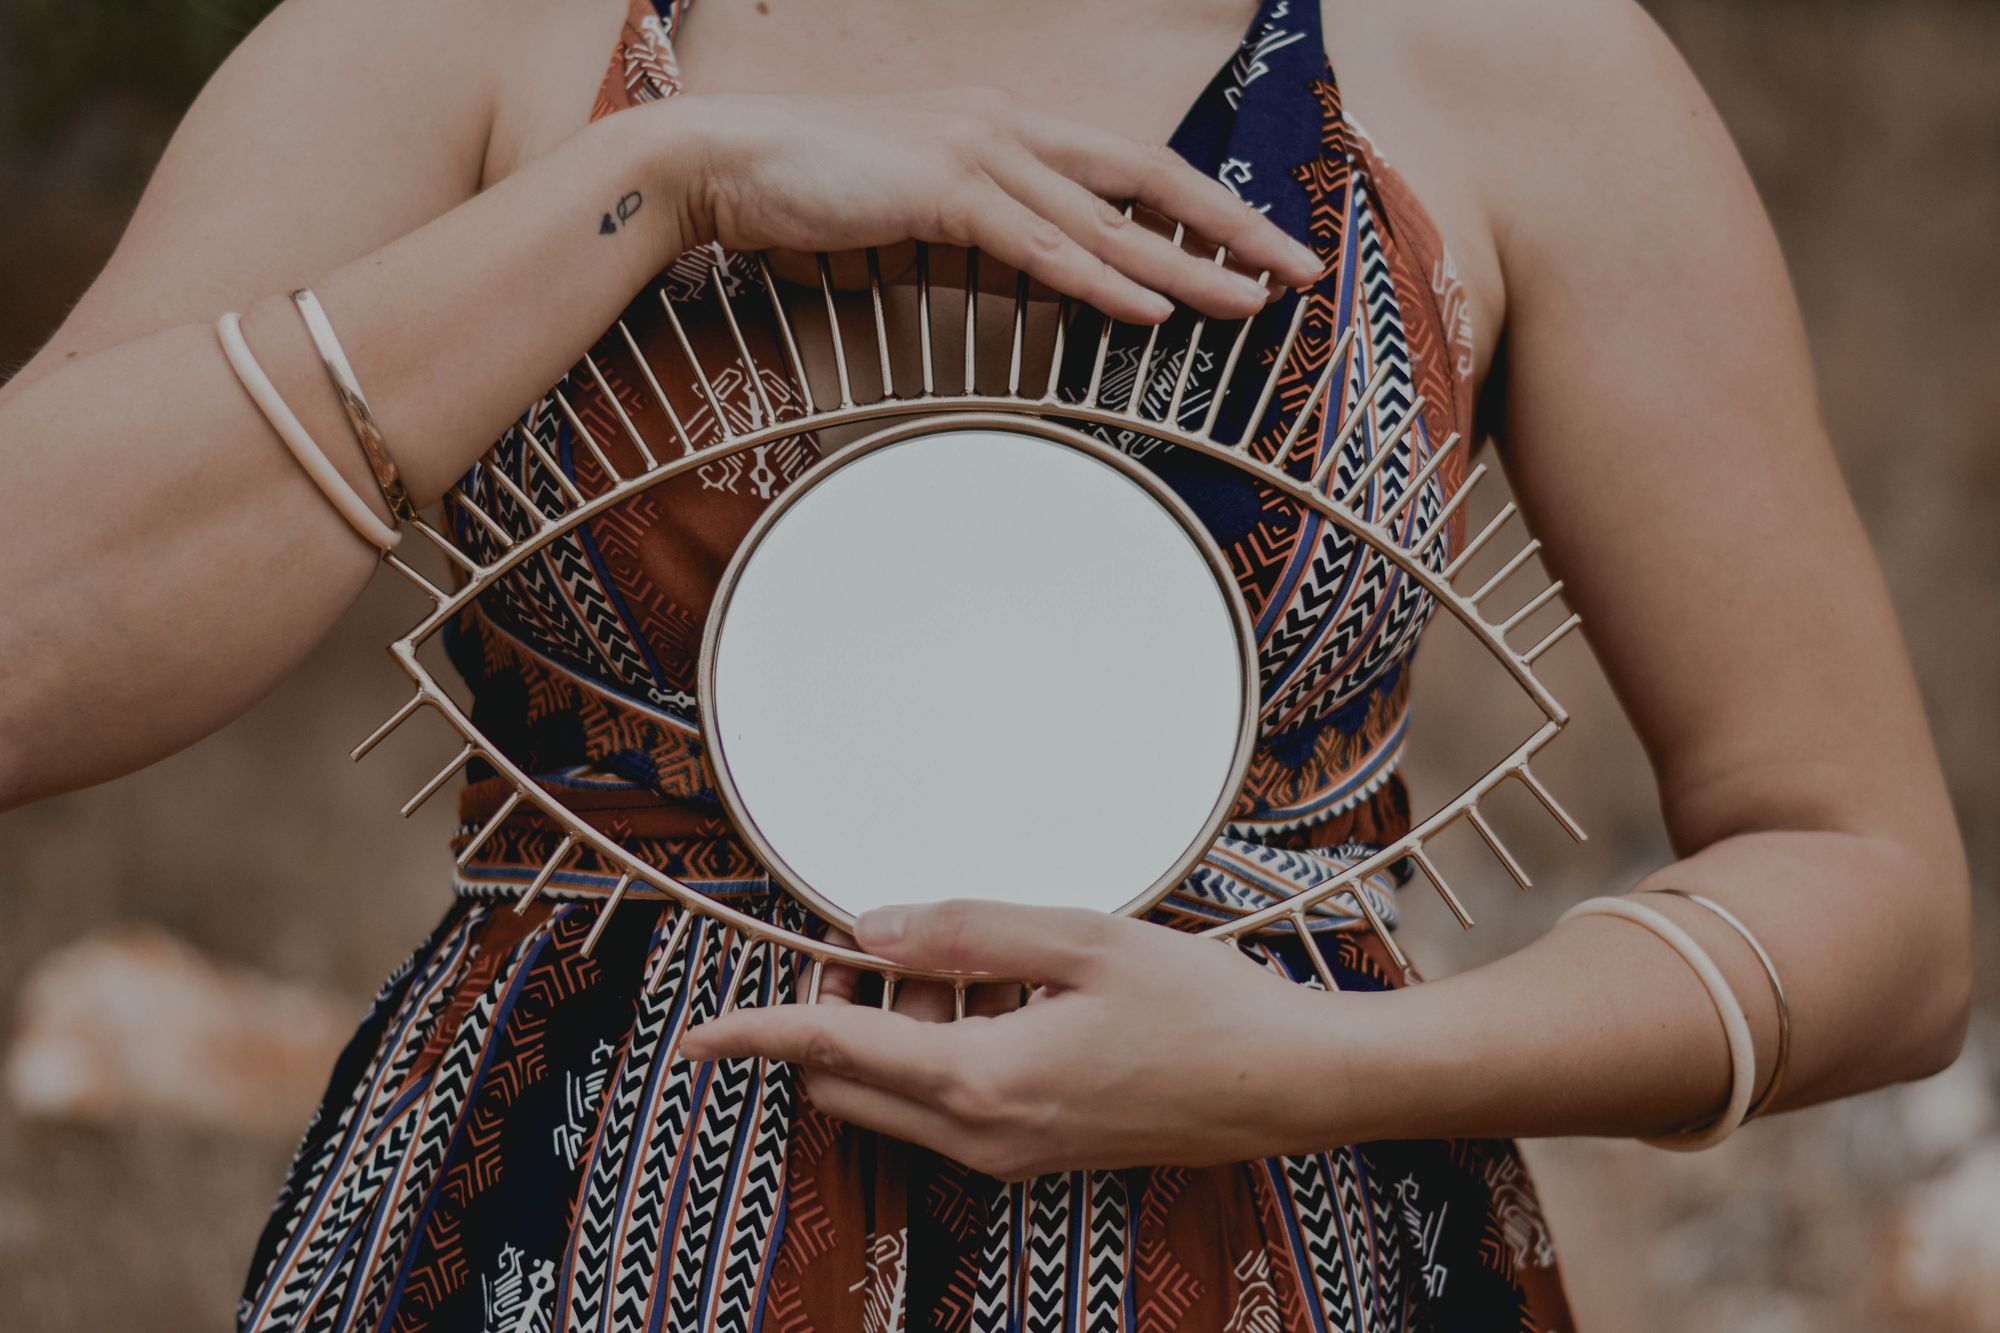 Image of woman holding a mirror framed in a way to appear as if the mirror is an eye